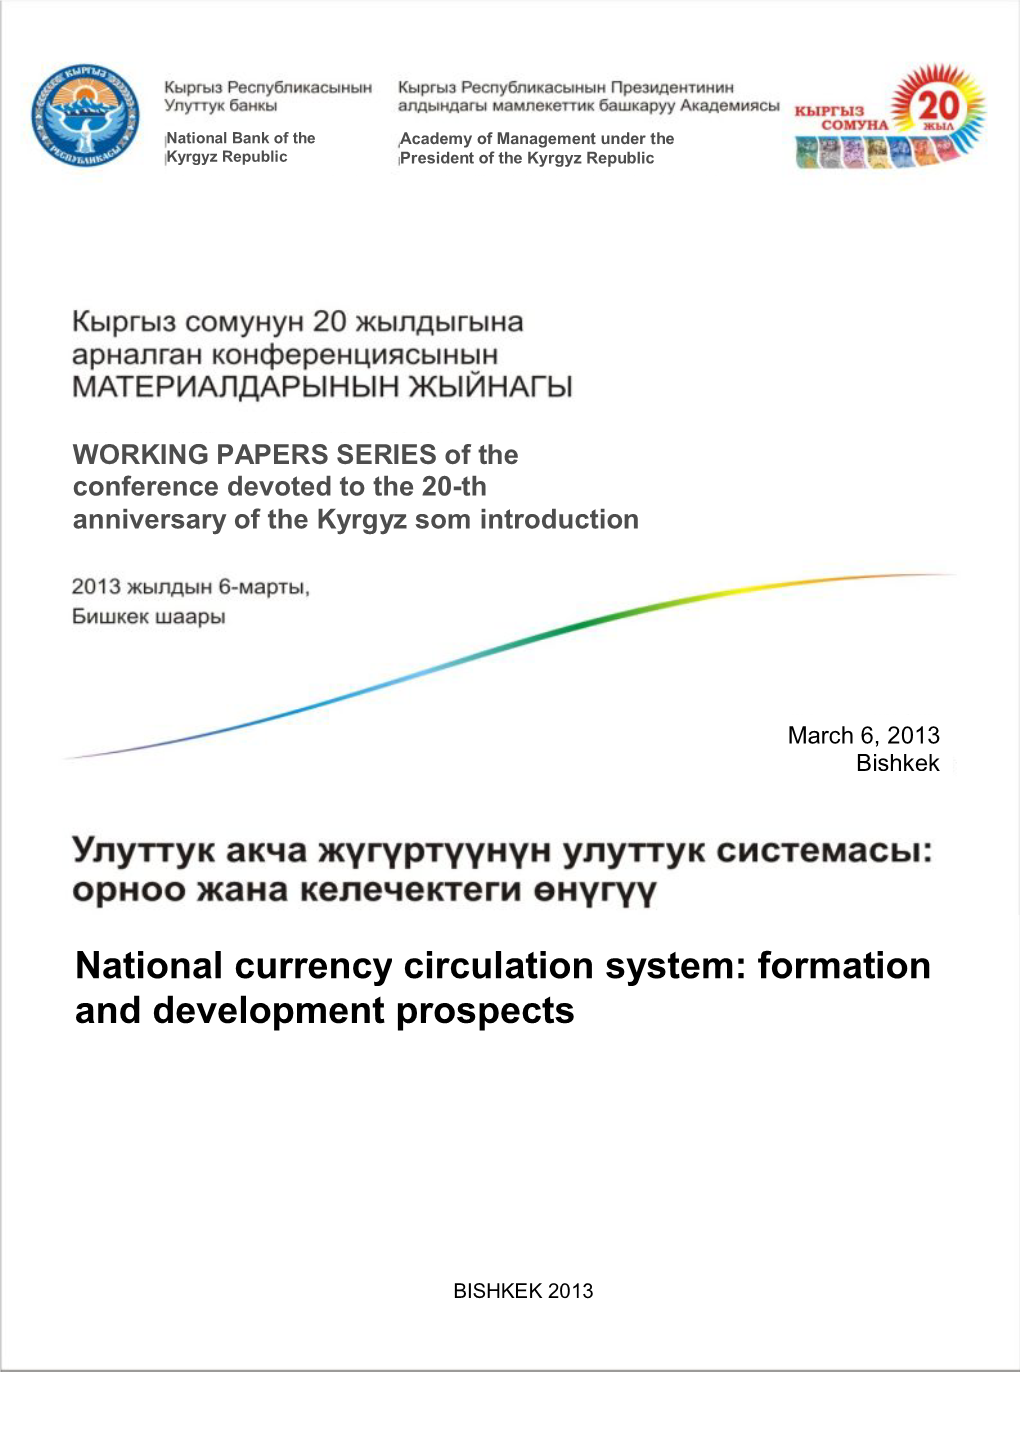 National Currency Circulation System: Formation and Development Prospects